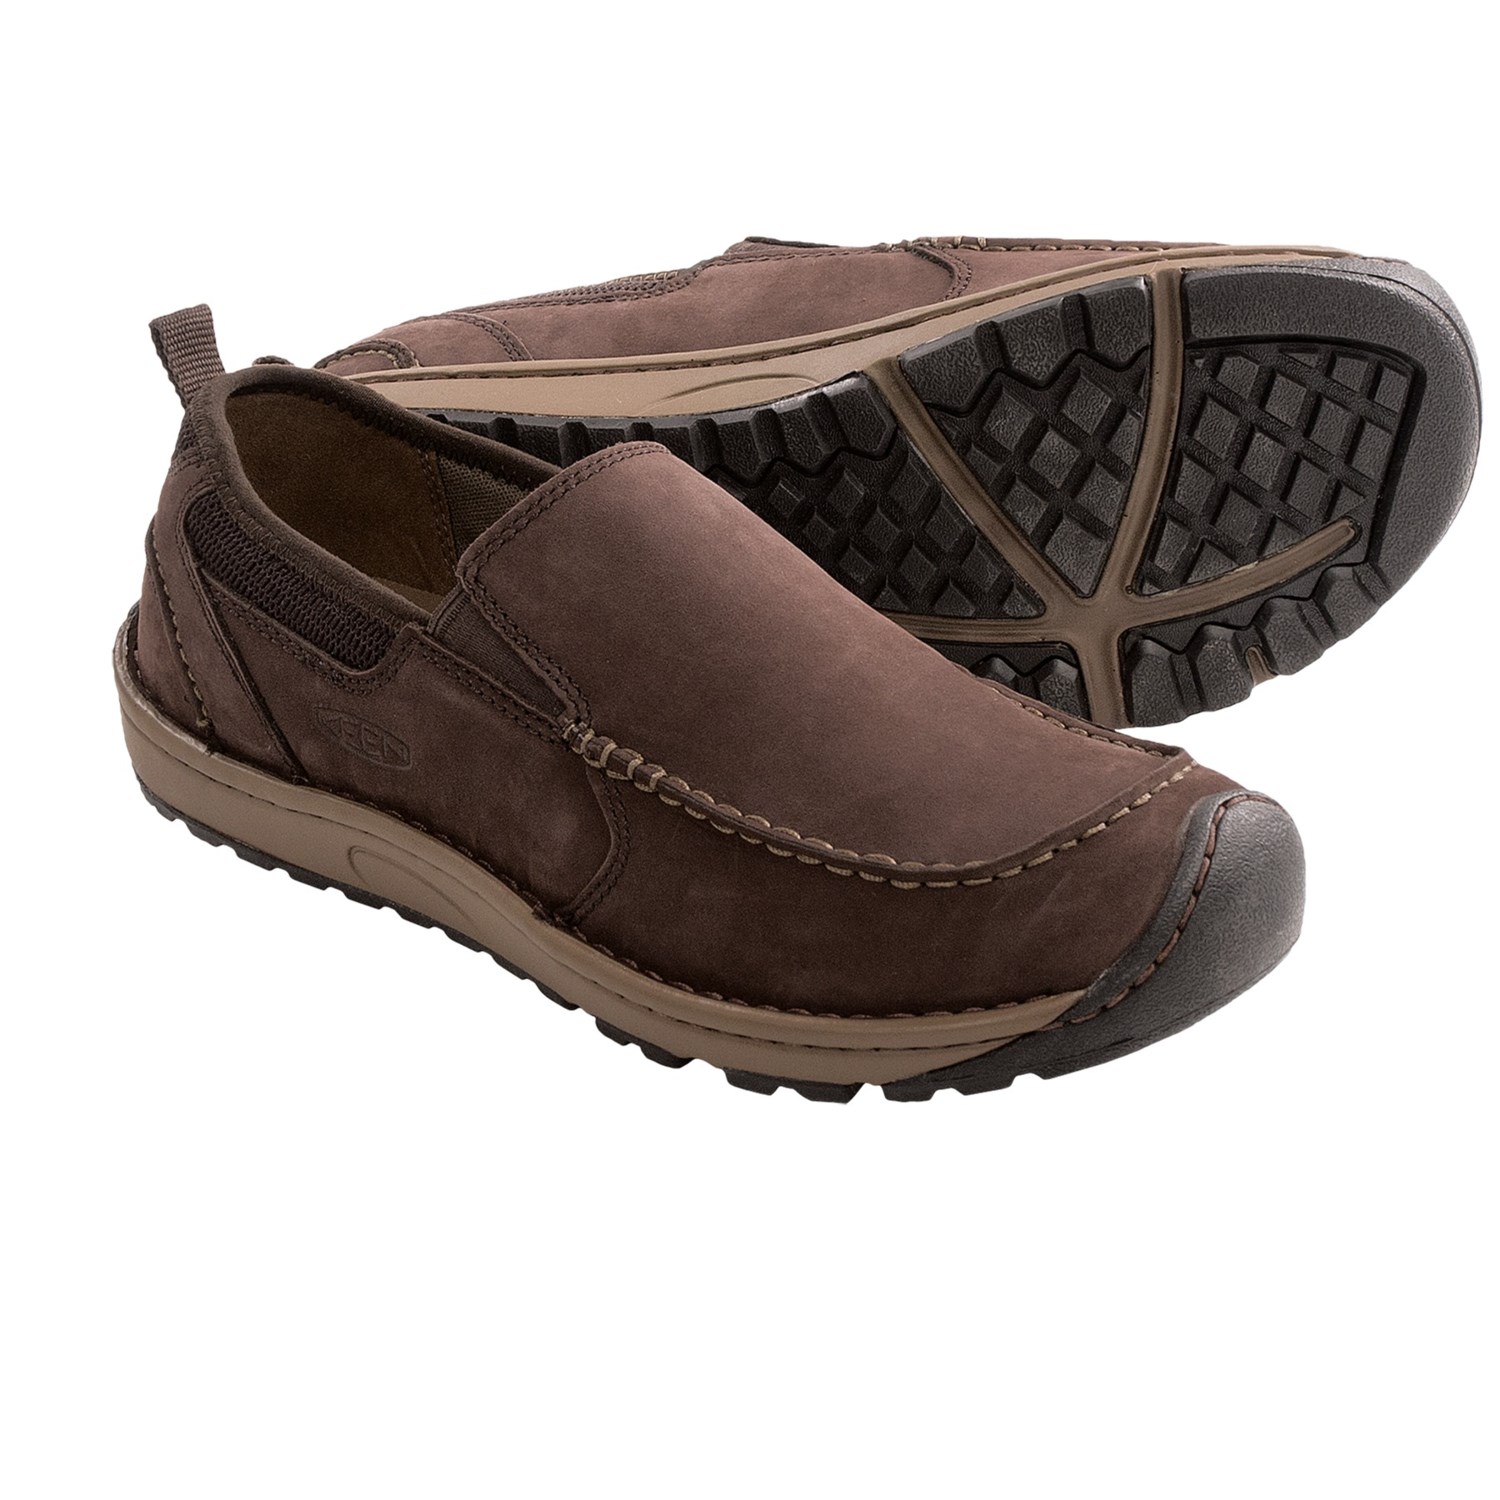 Keen Dillon II Slip-On Shoes - Leather (For Men) in Coffee Bean